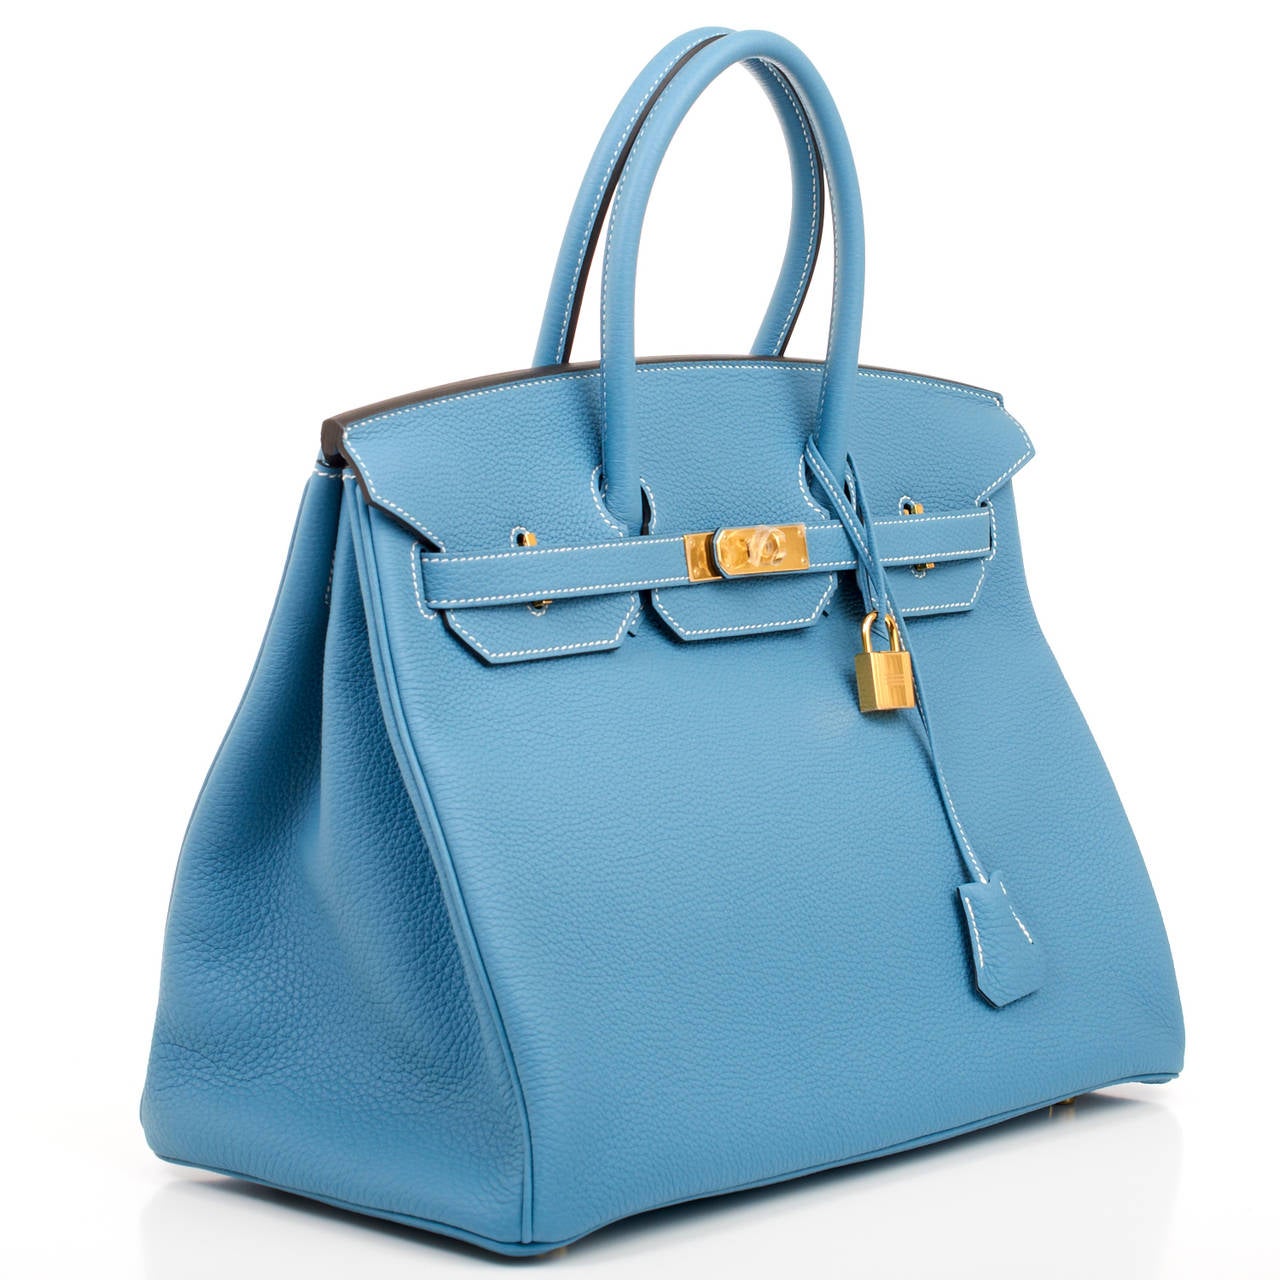 Hermes Blue Jean Birkin 35cm in togo (bull) leather with gold hardware.

This Birkin features white contrast stitching, front toggle closure, clochette with lock and two keys, and double rolled handles. The interior is lined in Blue Jean chevre